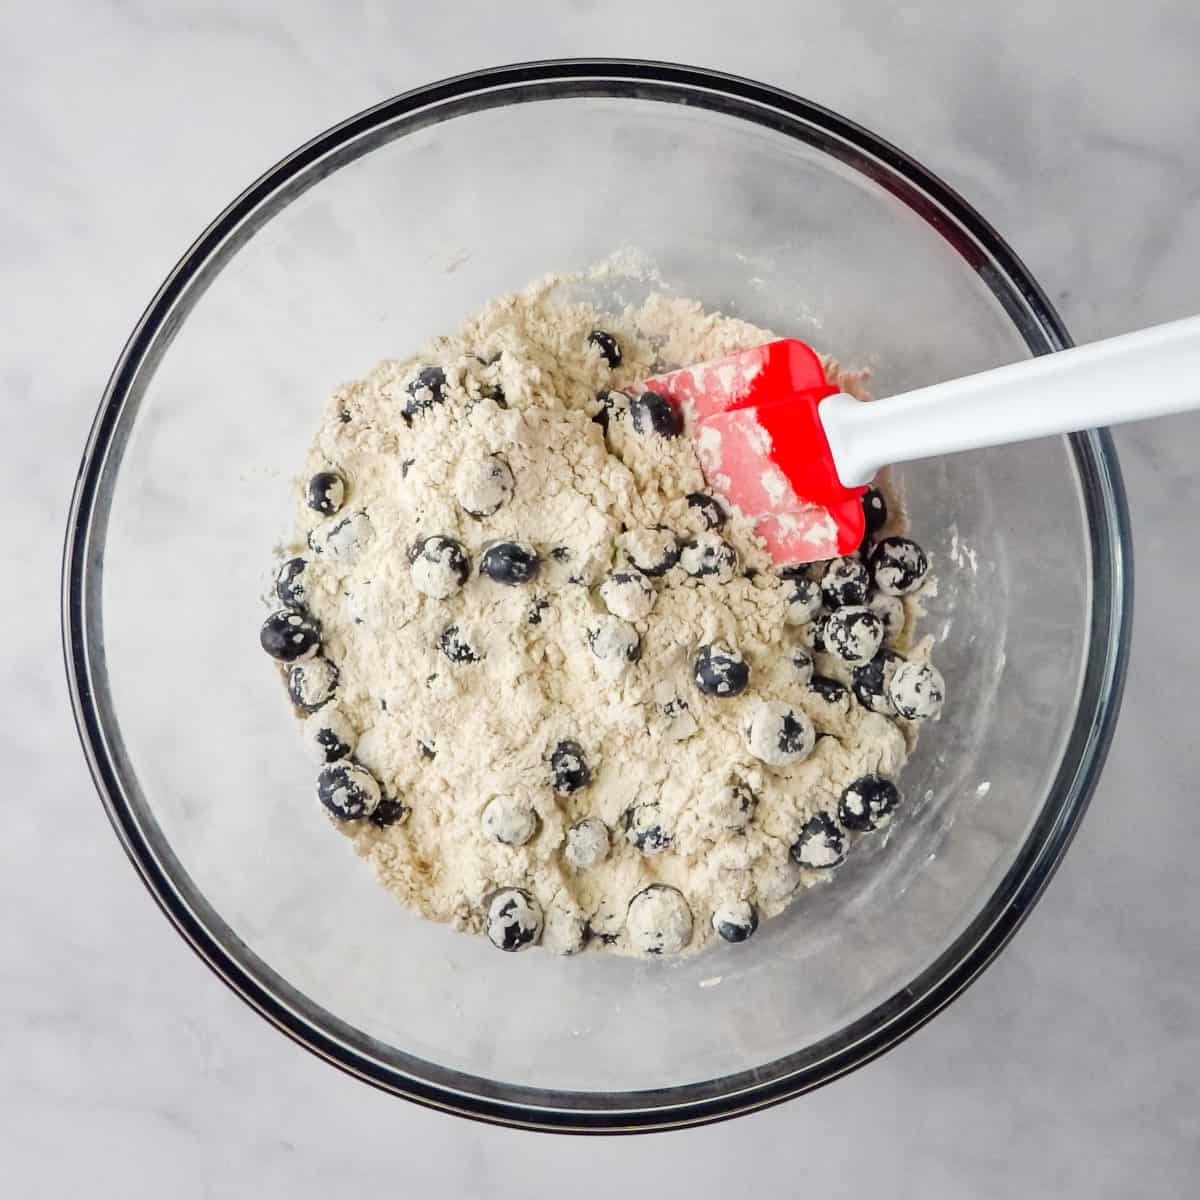 Tossing blueberries in the flour mixture with a red and white spatula.